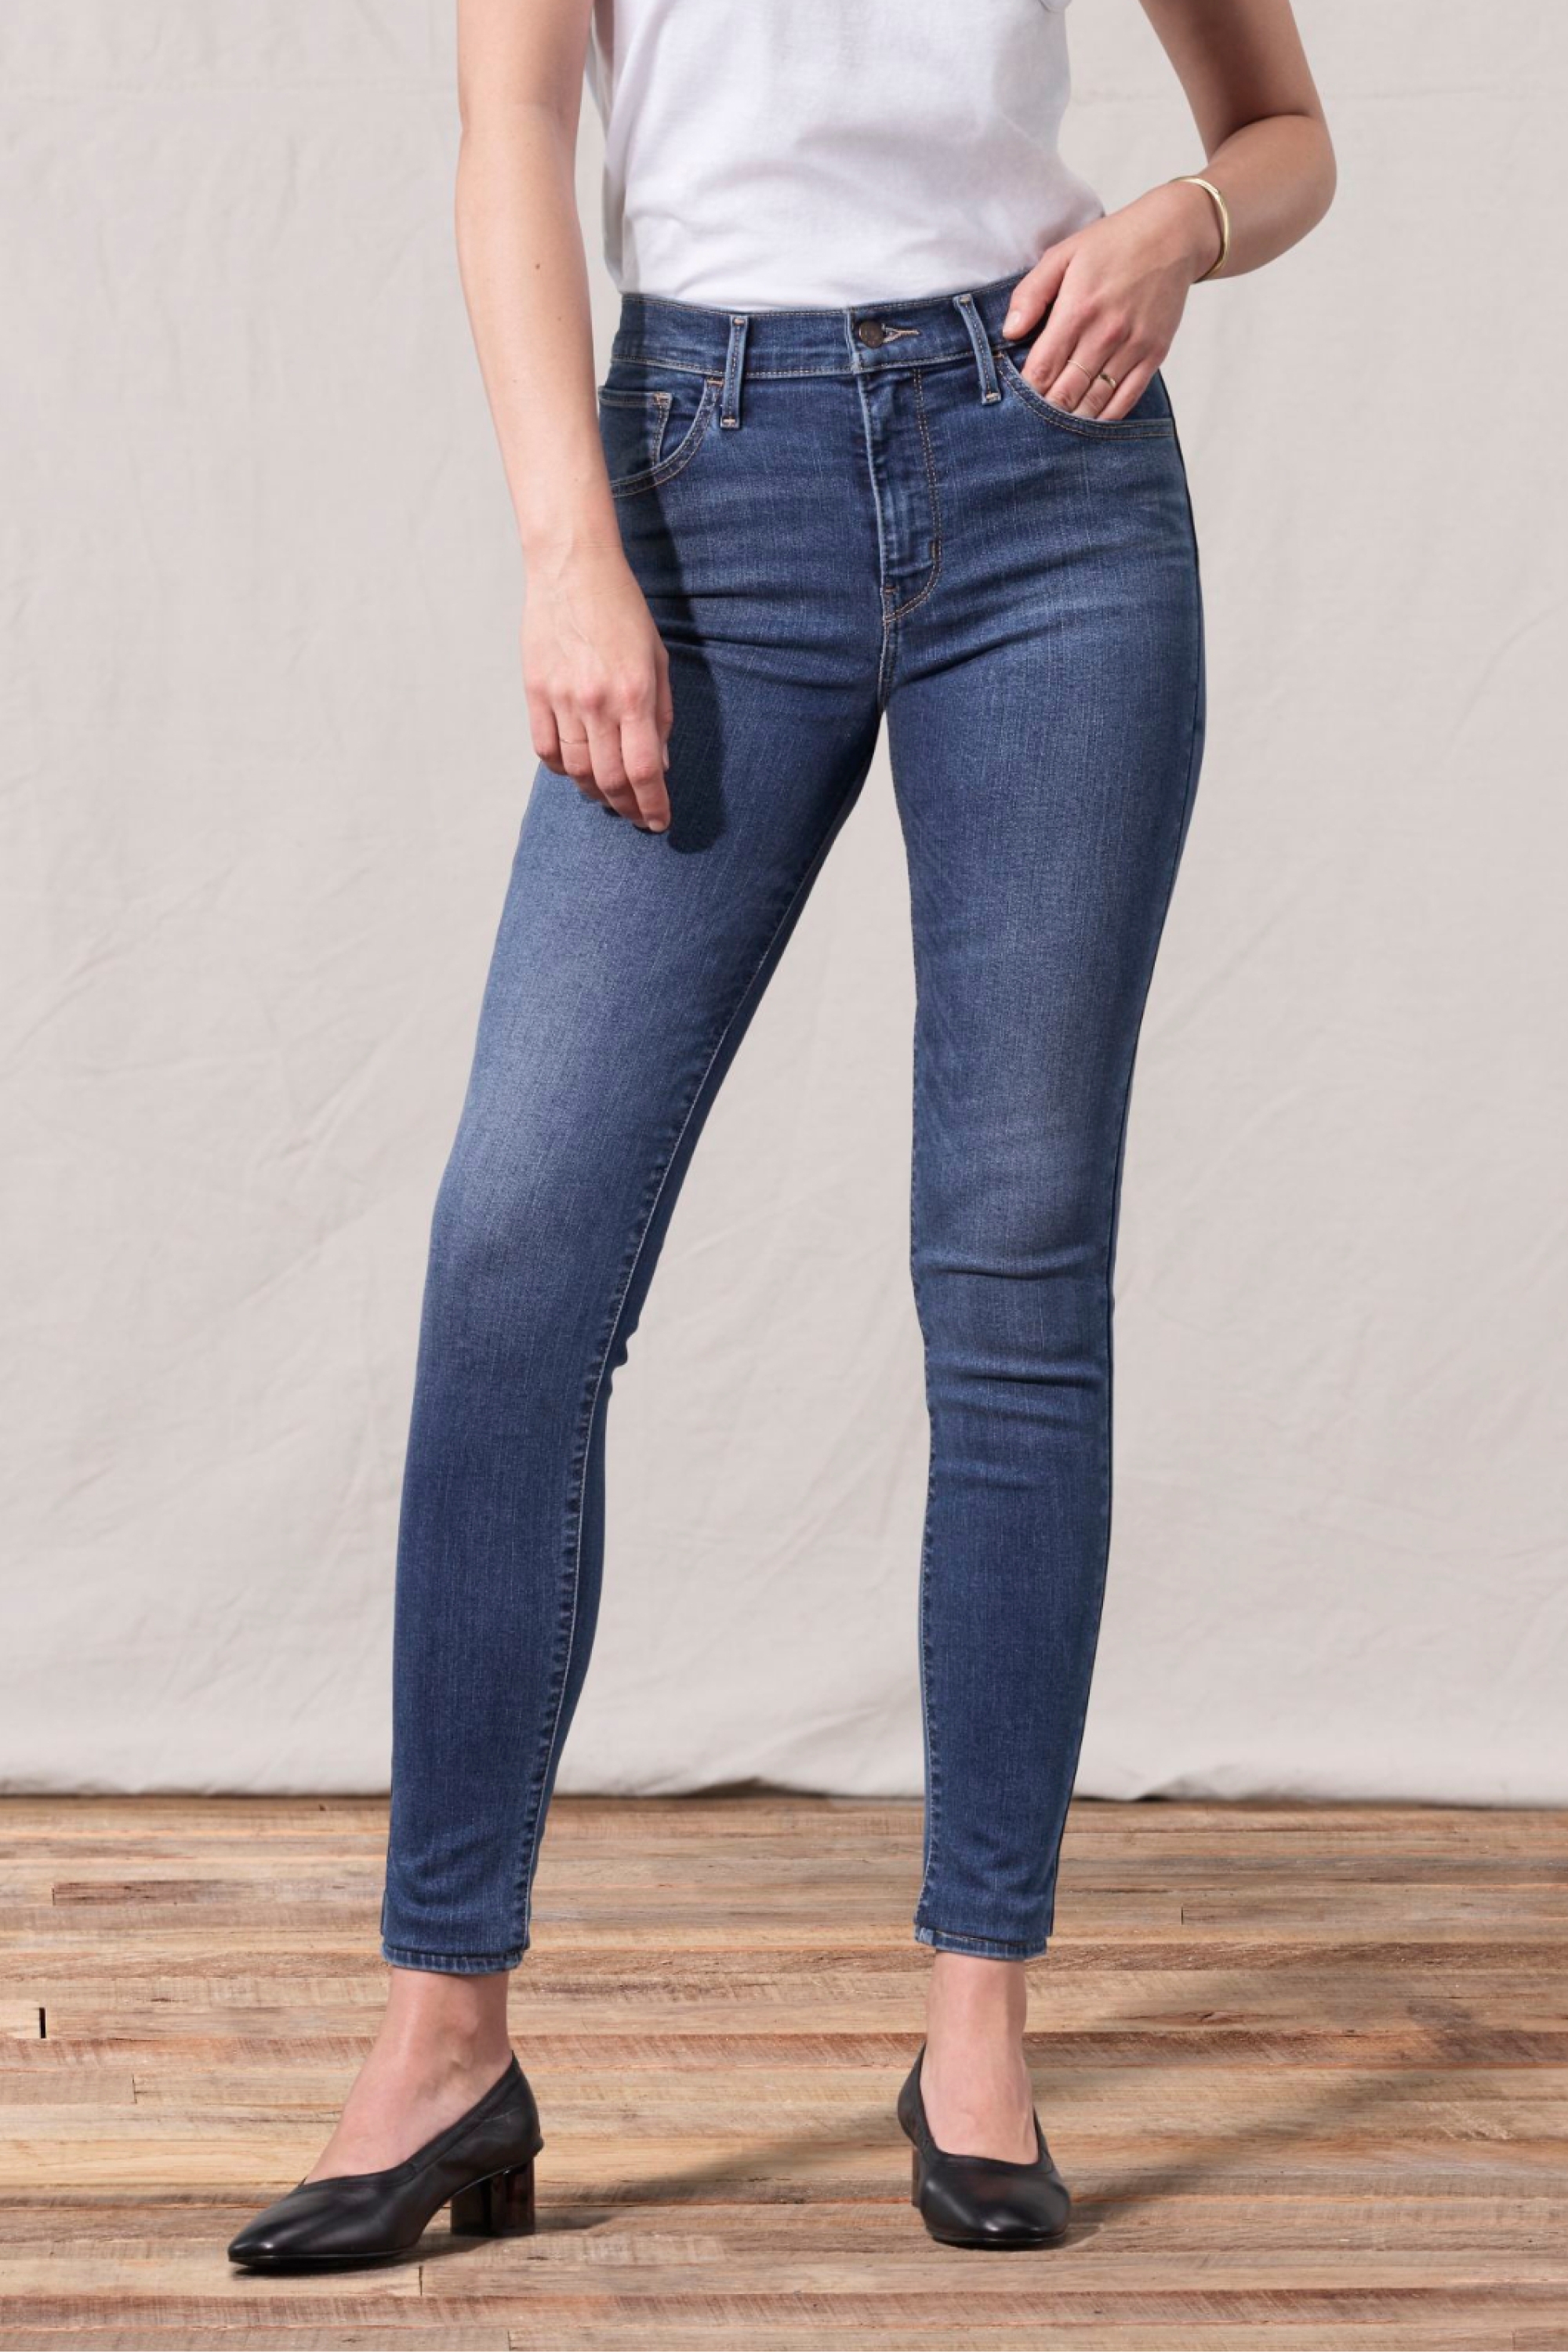 the bay levis jeans womens